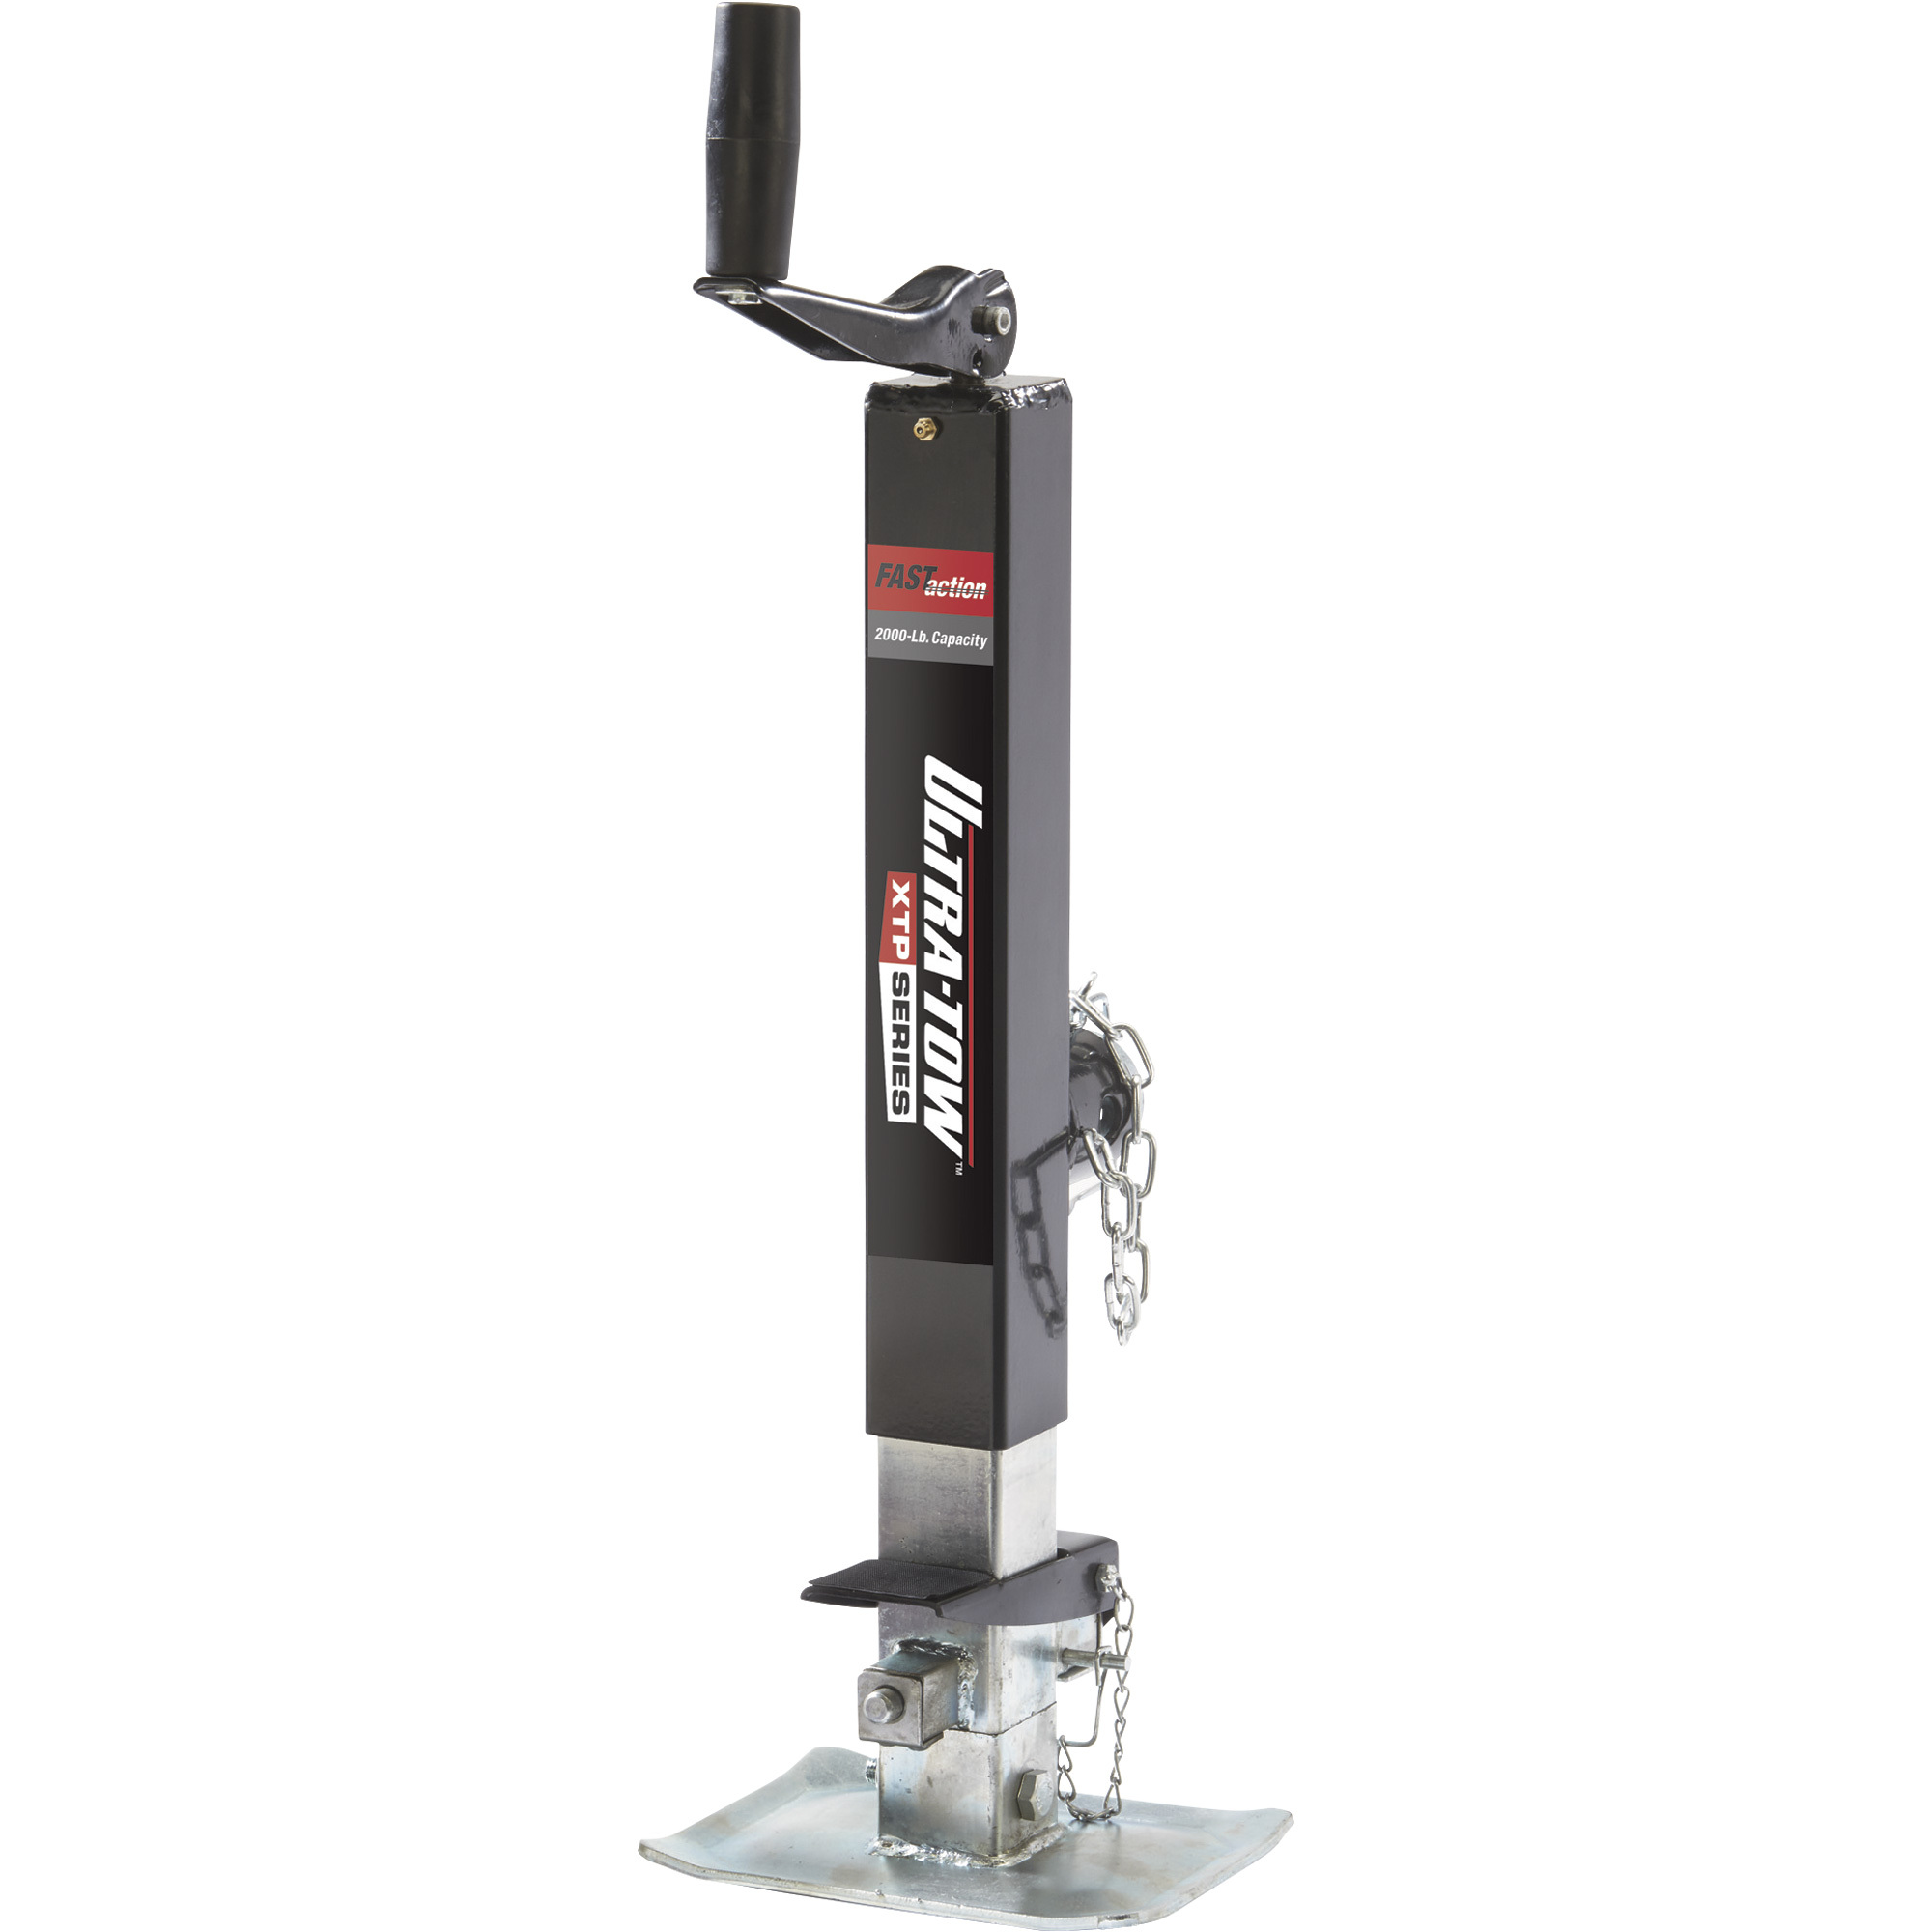 Ultra-Tow XTP Fast Action Square Tube Trailer Jack â 2000-Lb., Topwind, Tube Mount, Weld-On